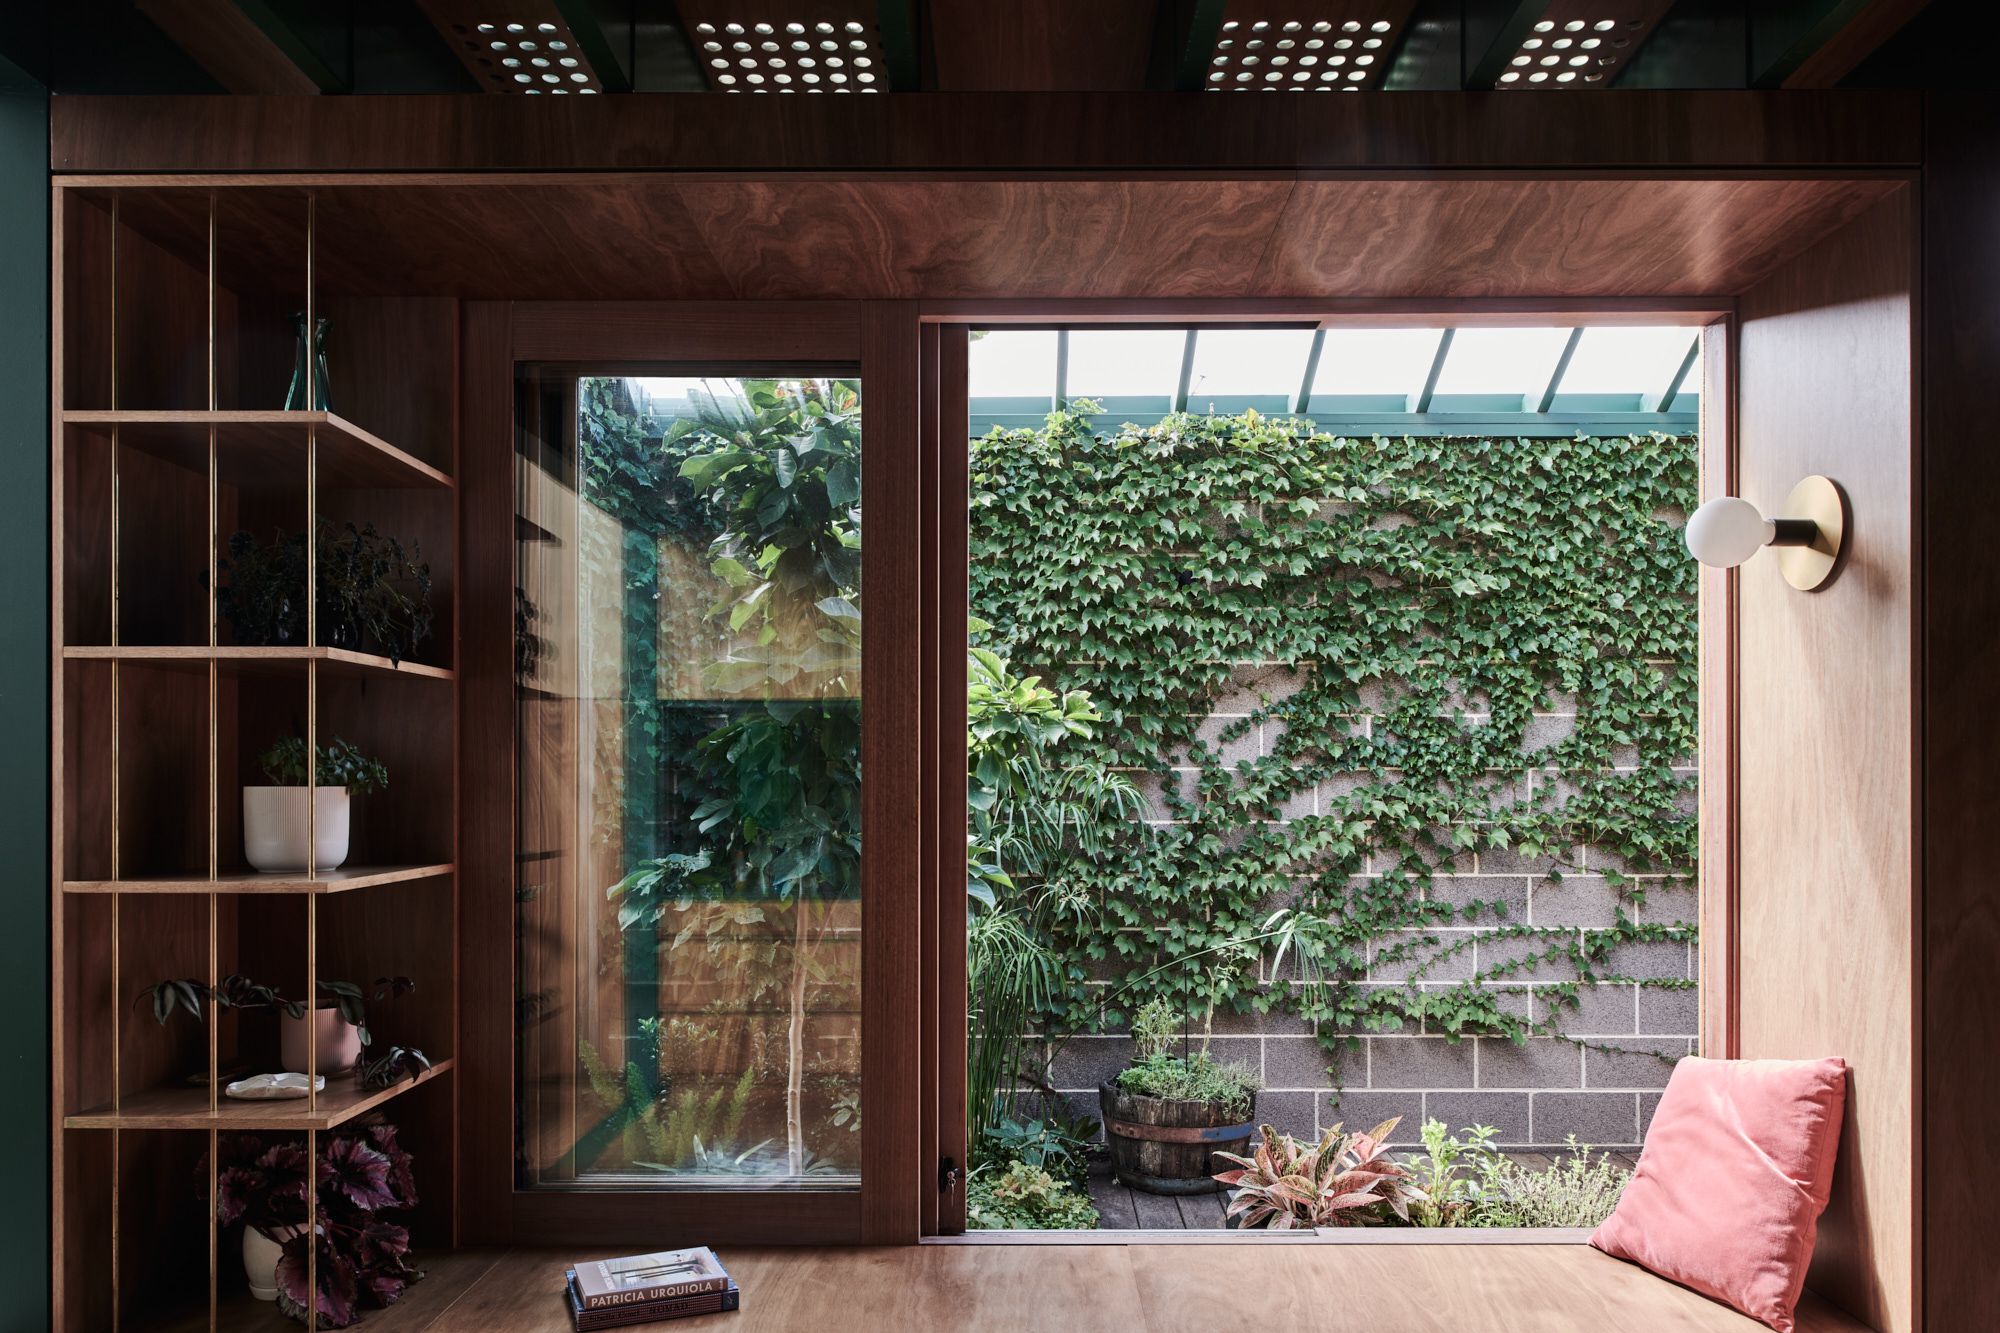 Hot Top Peak by FIGR Architecture. Seating/reading nook, windows open out to courtyard.